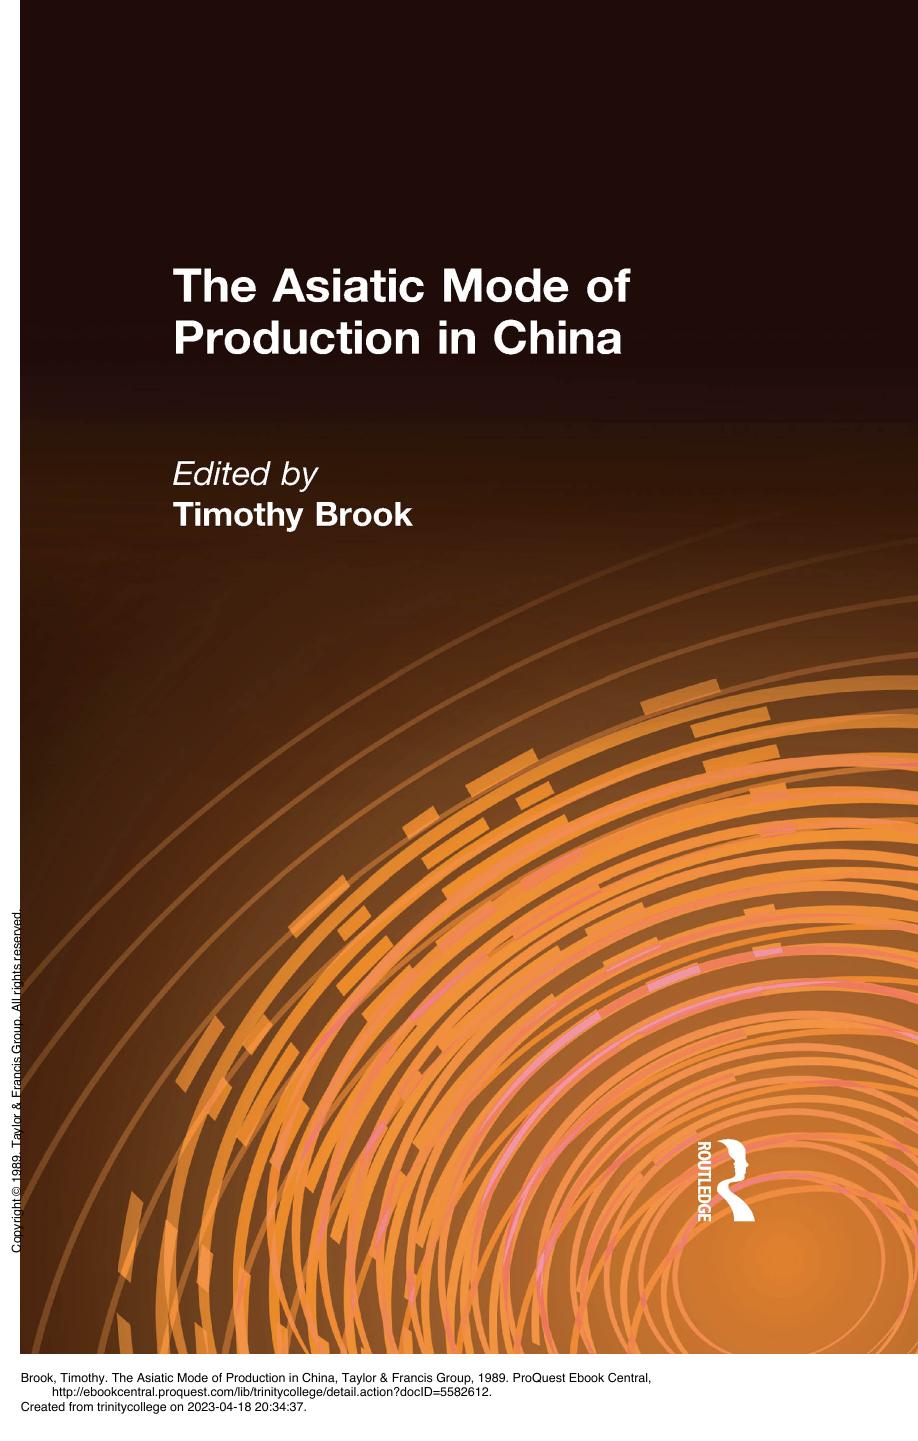 The Asiatic Mode of Production in China by Timothy Brook